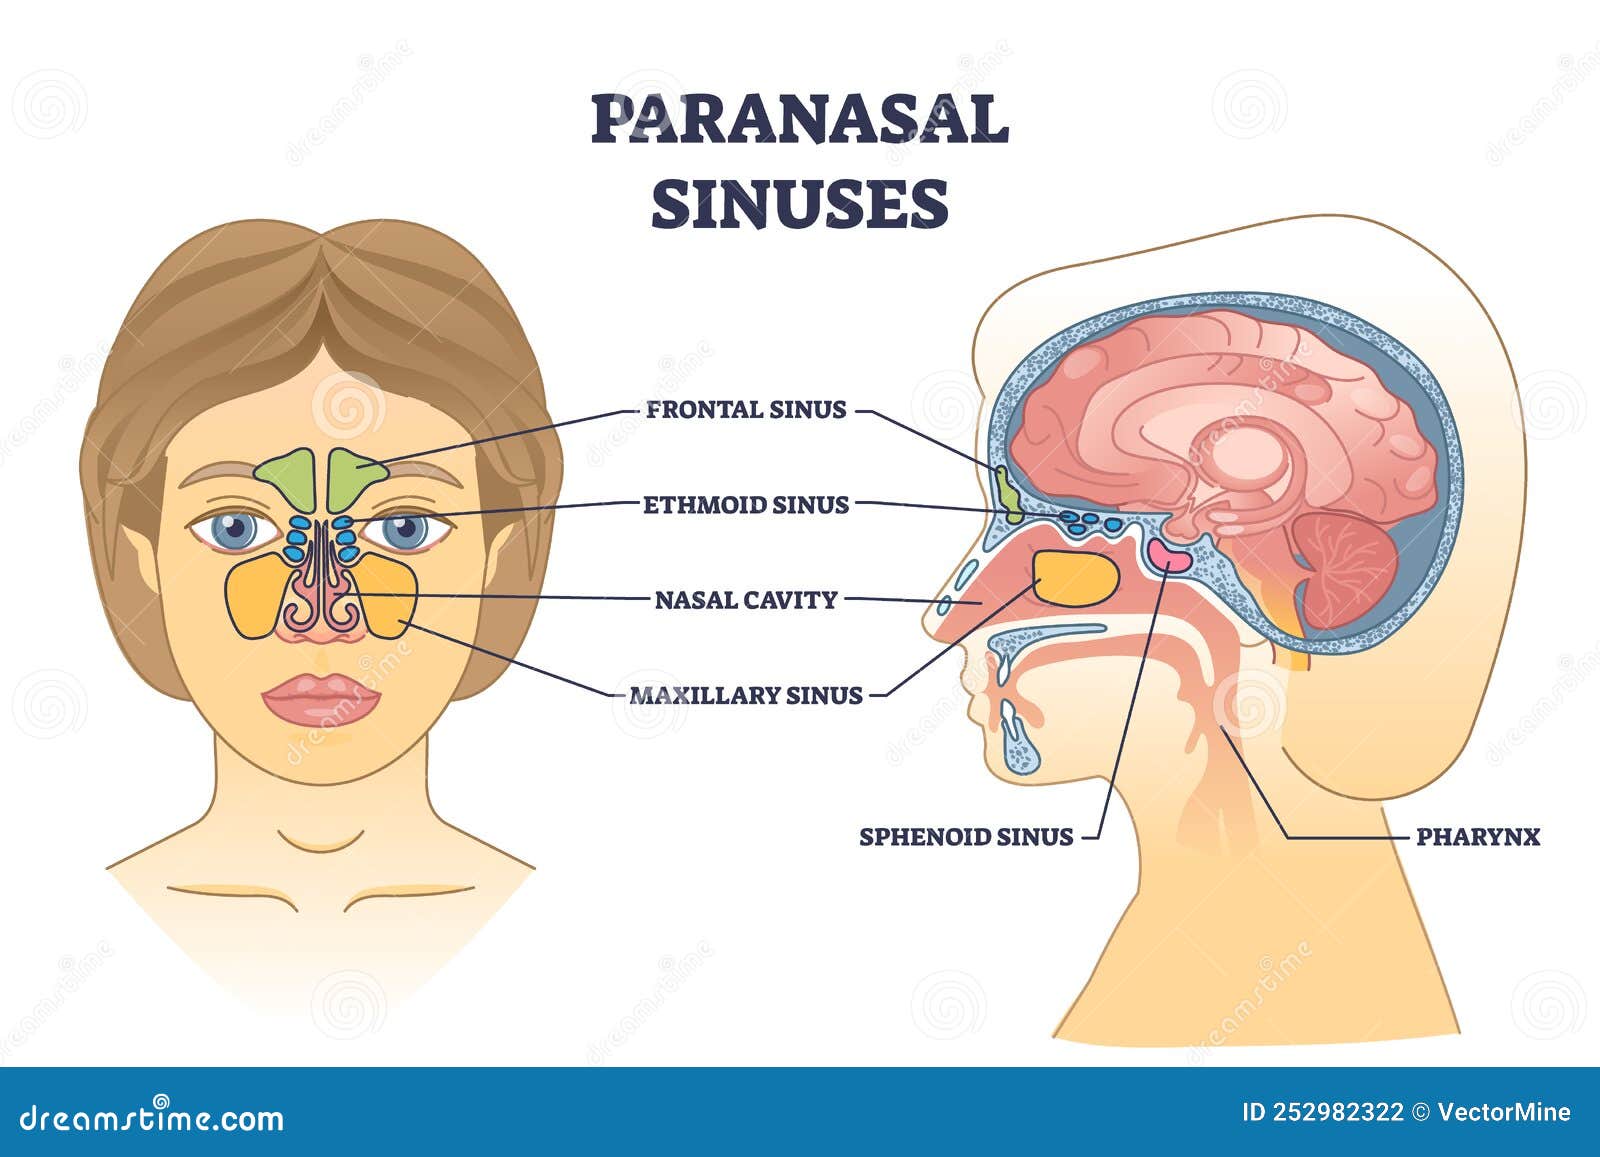 paranasal sinuses location and nasal cavity structure anatomy outline diagram